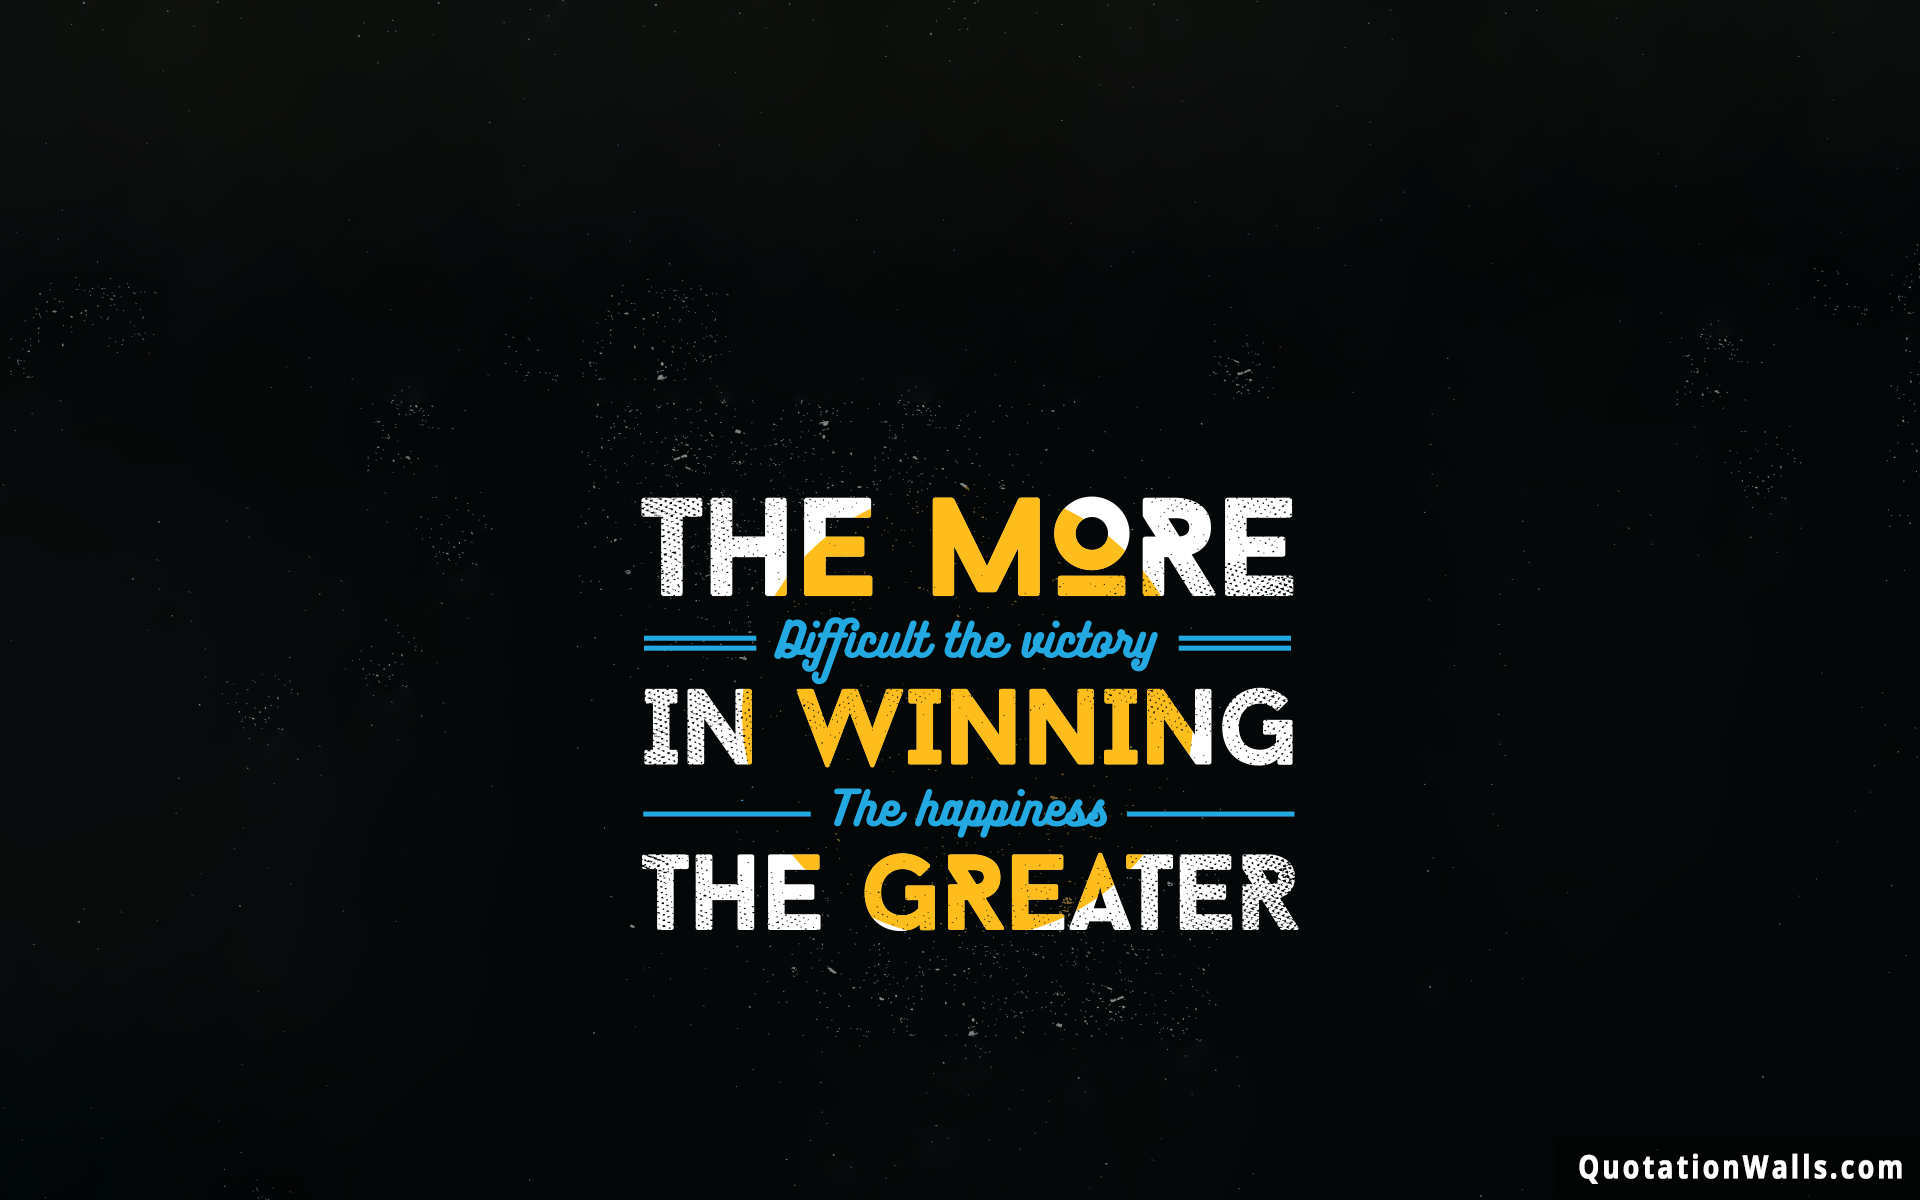 Victory quotes images wallpapers for desktop pictures desktop backgrounds hd photos free download